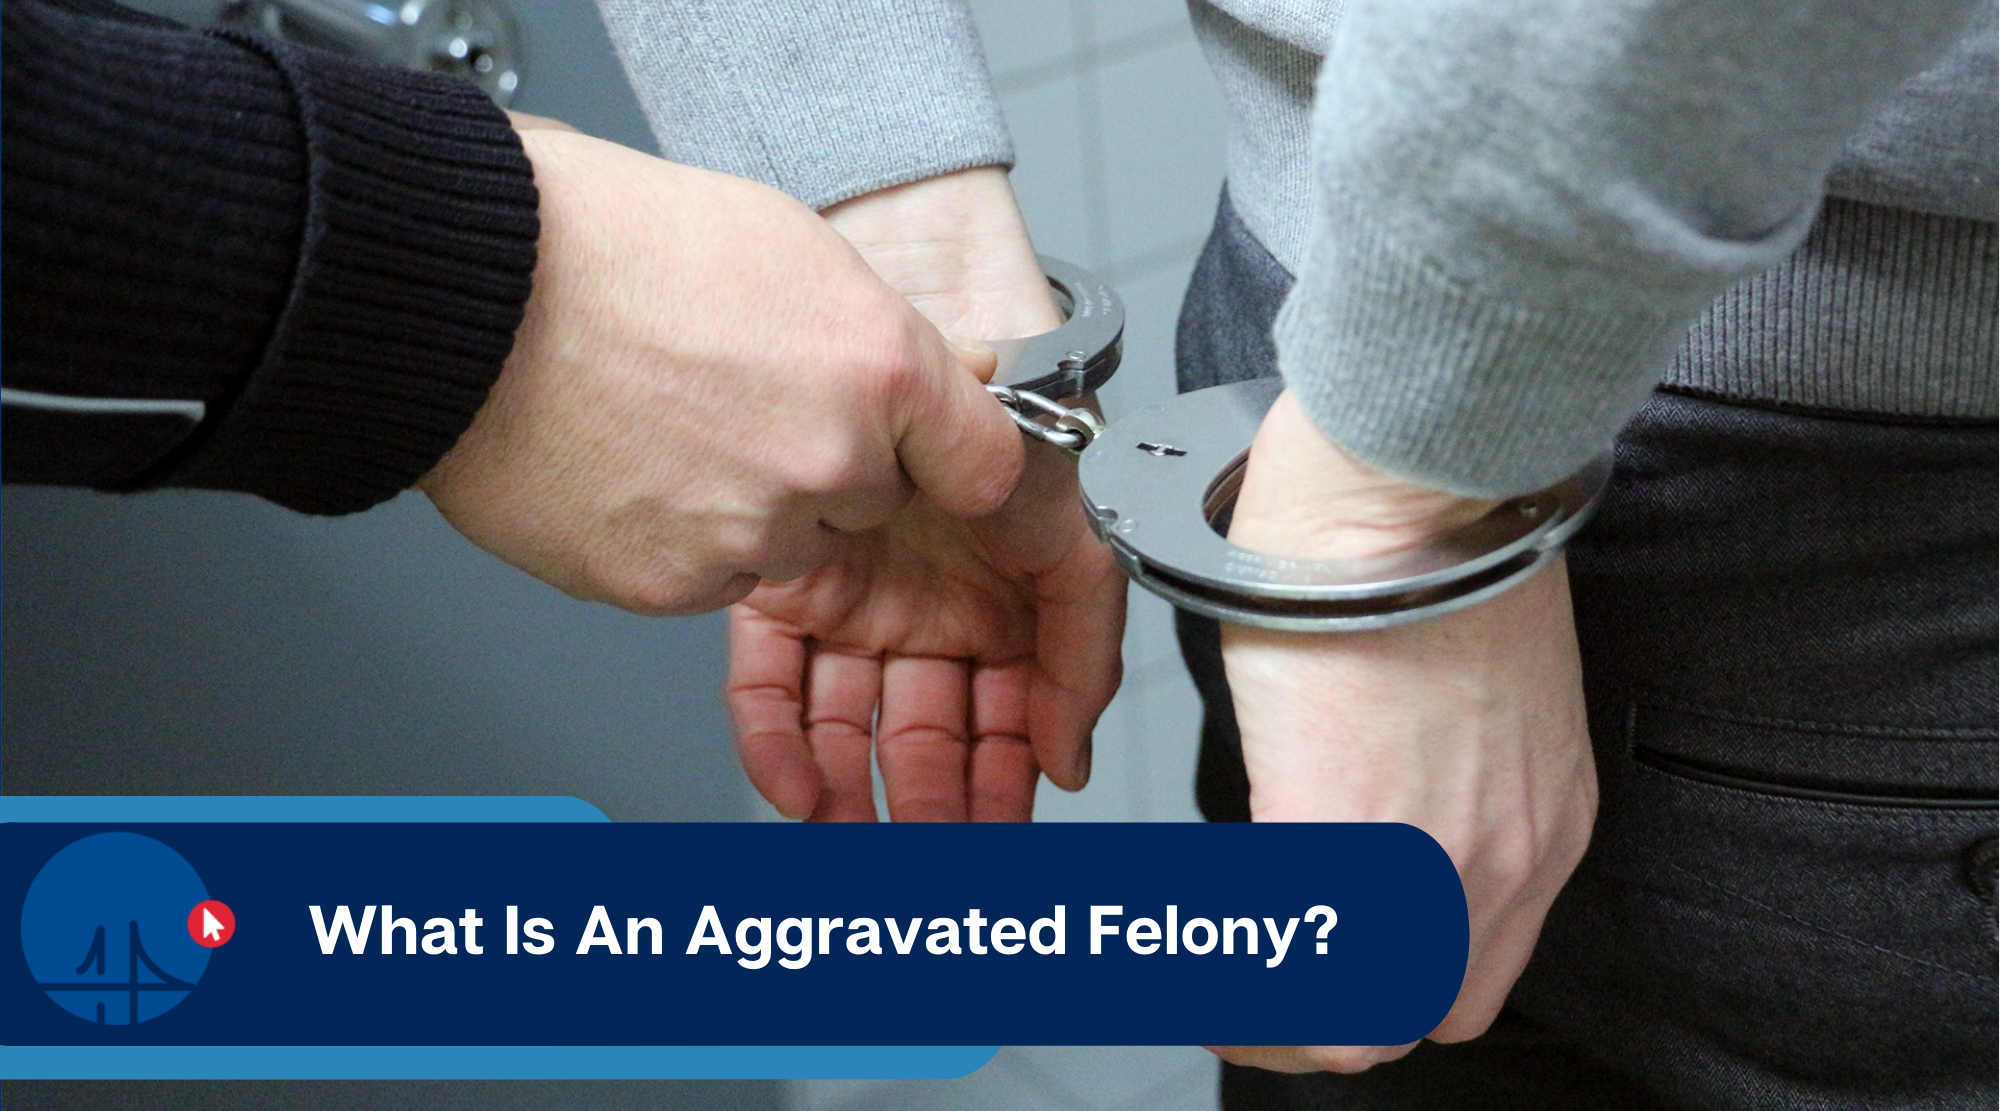 What is an aggravated felony?